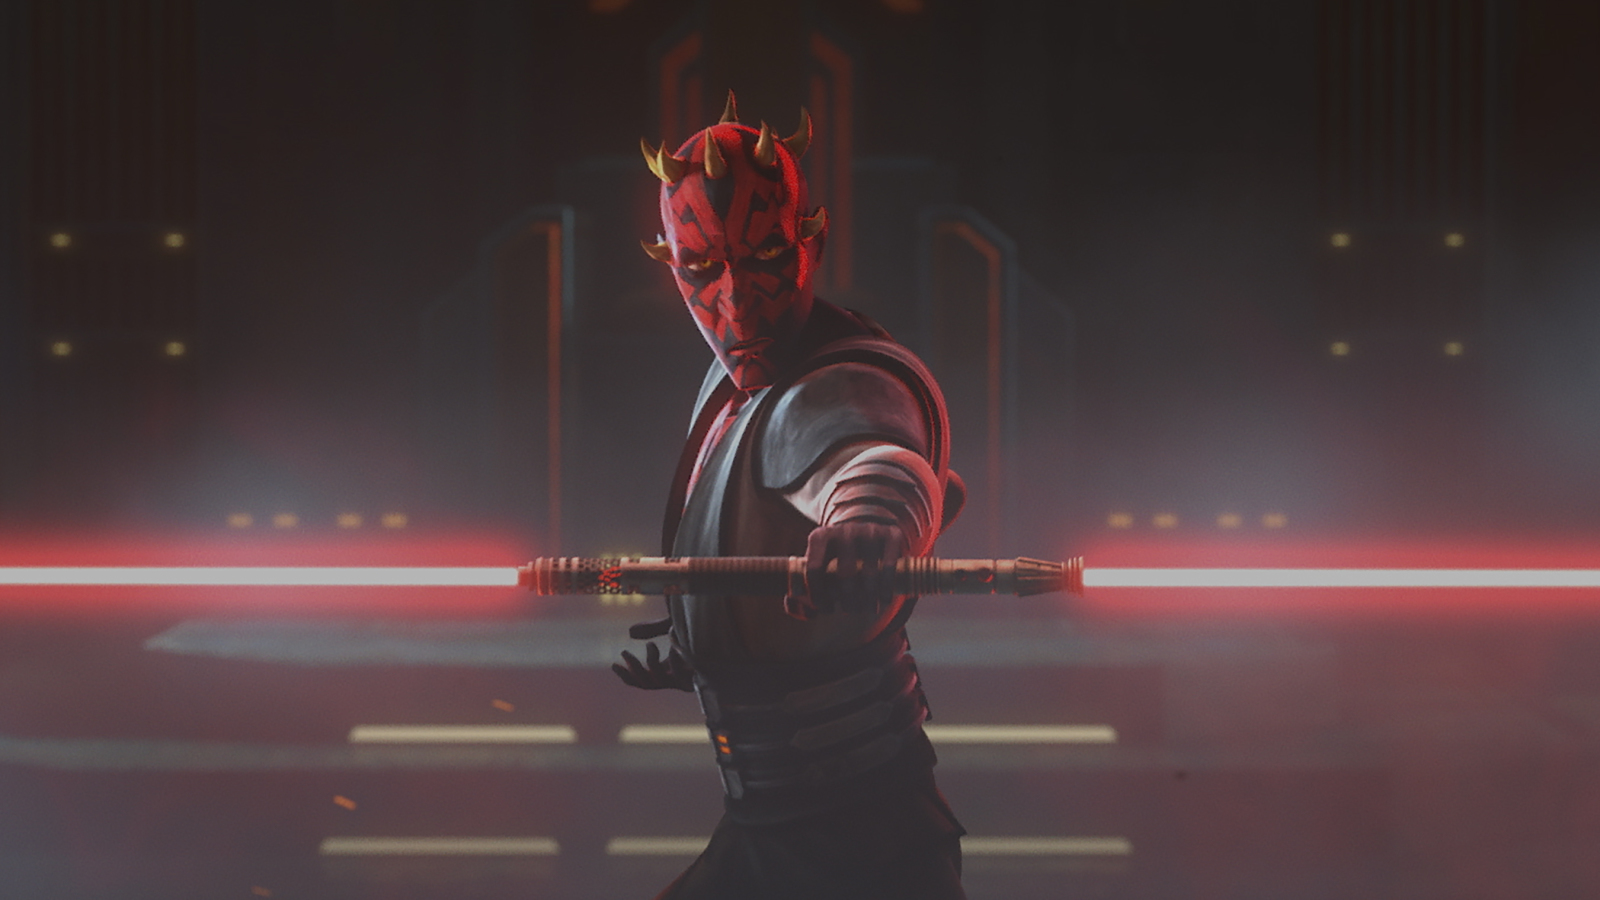 Pics, teasers and synopses for the end of Star Wars: The Clone Wars